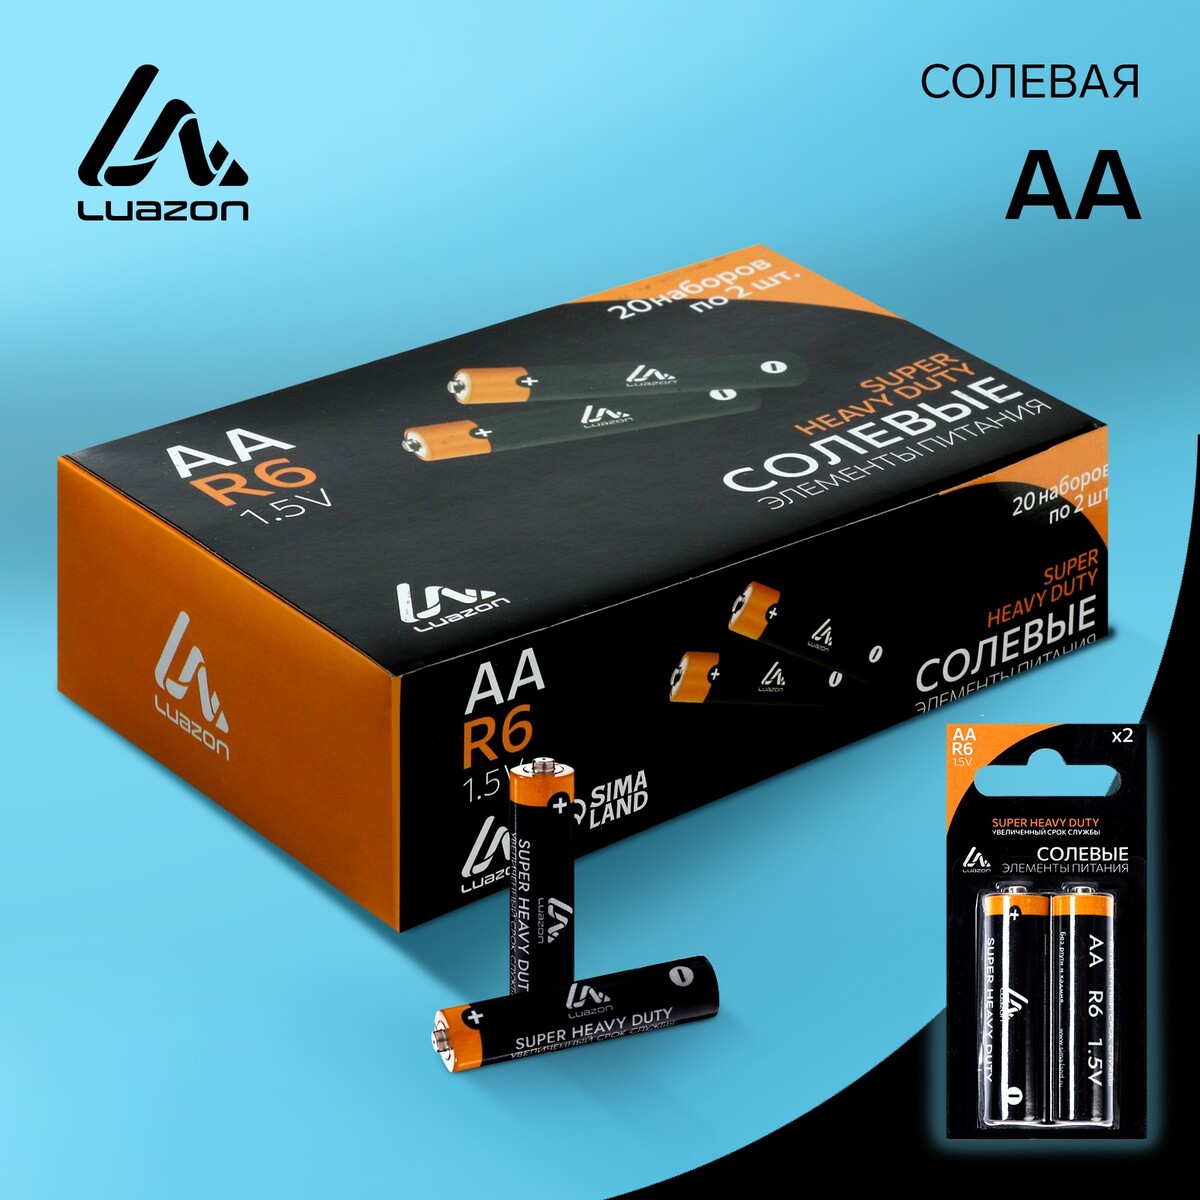 Батарейка солевая luazon super heavy duty, аа, r6, блистер, 2 шт load ptz heavy duty pan tilt support pelco d protocol and rs485 22 or 30kg different models are optional